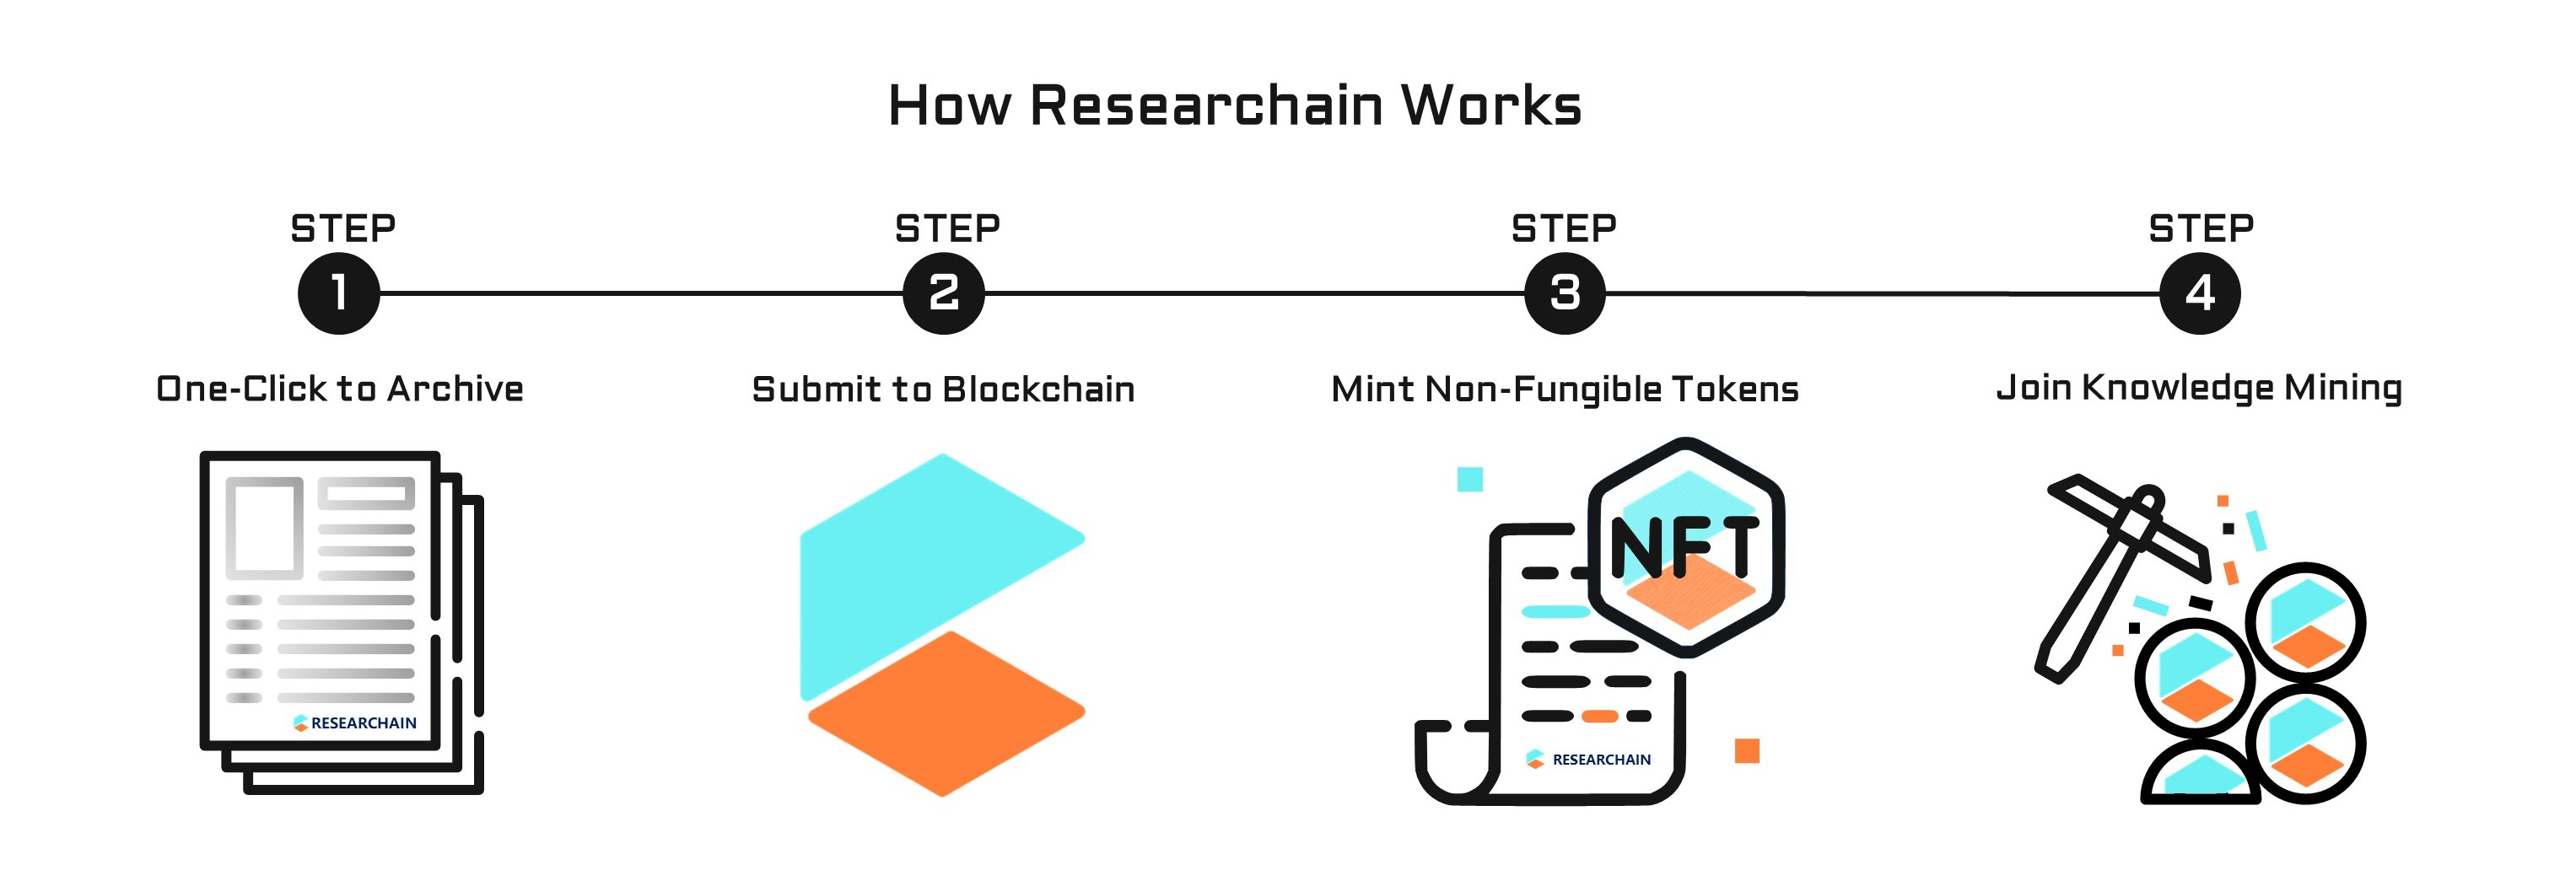 How Researchain Works